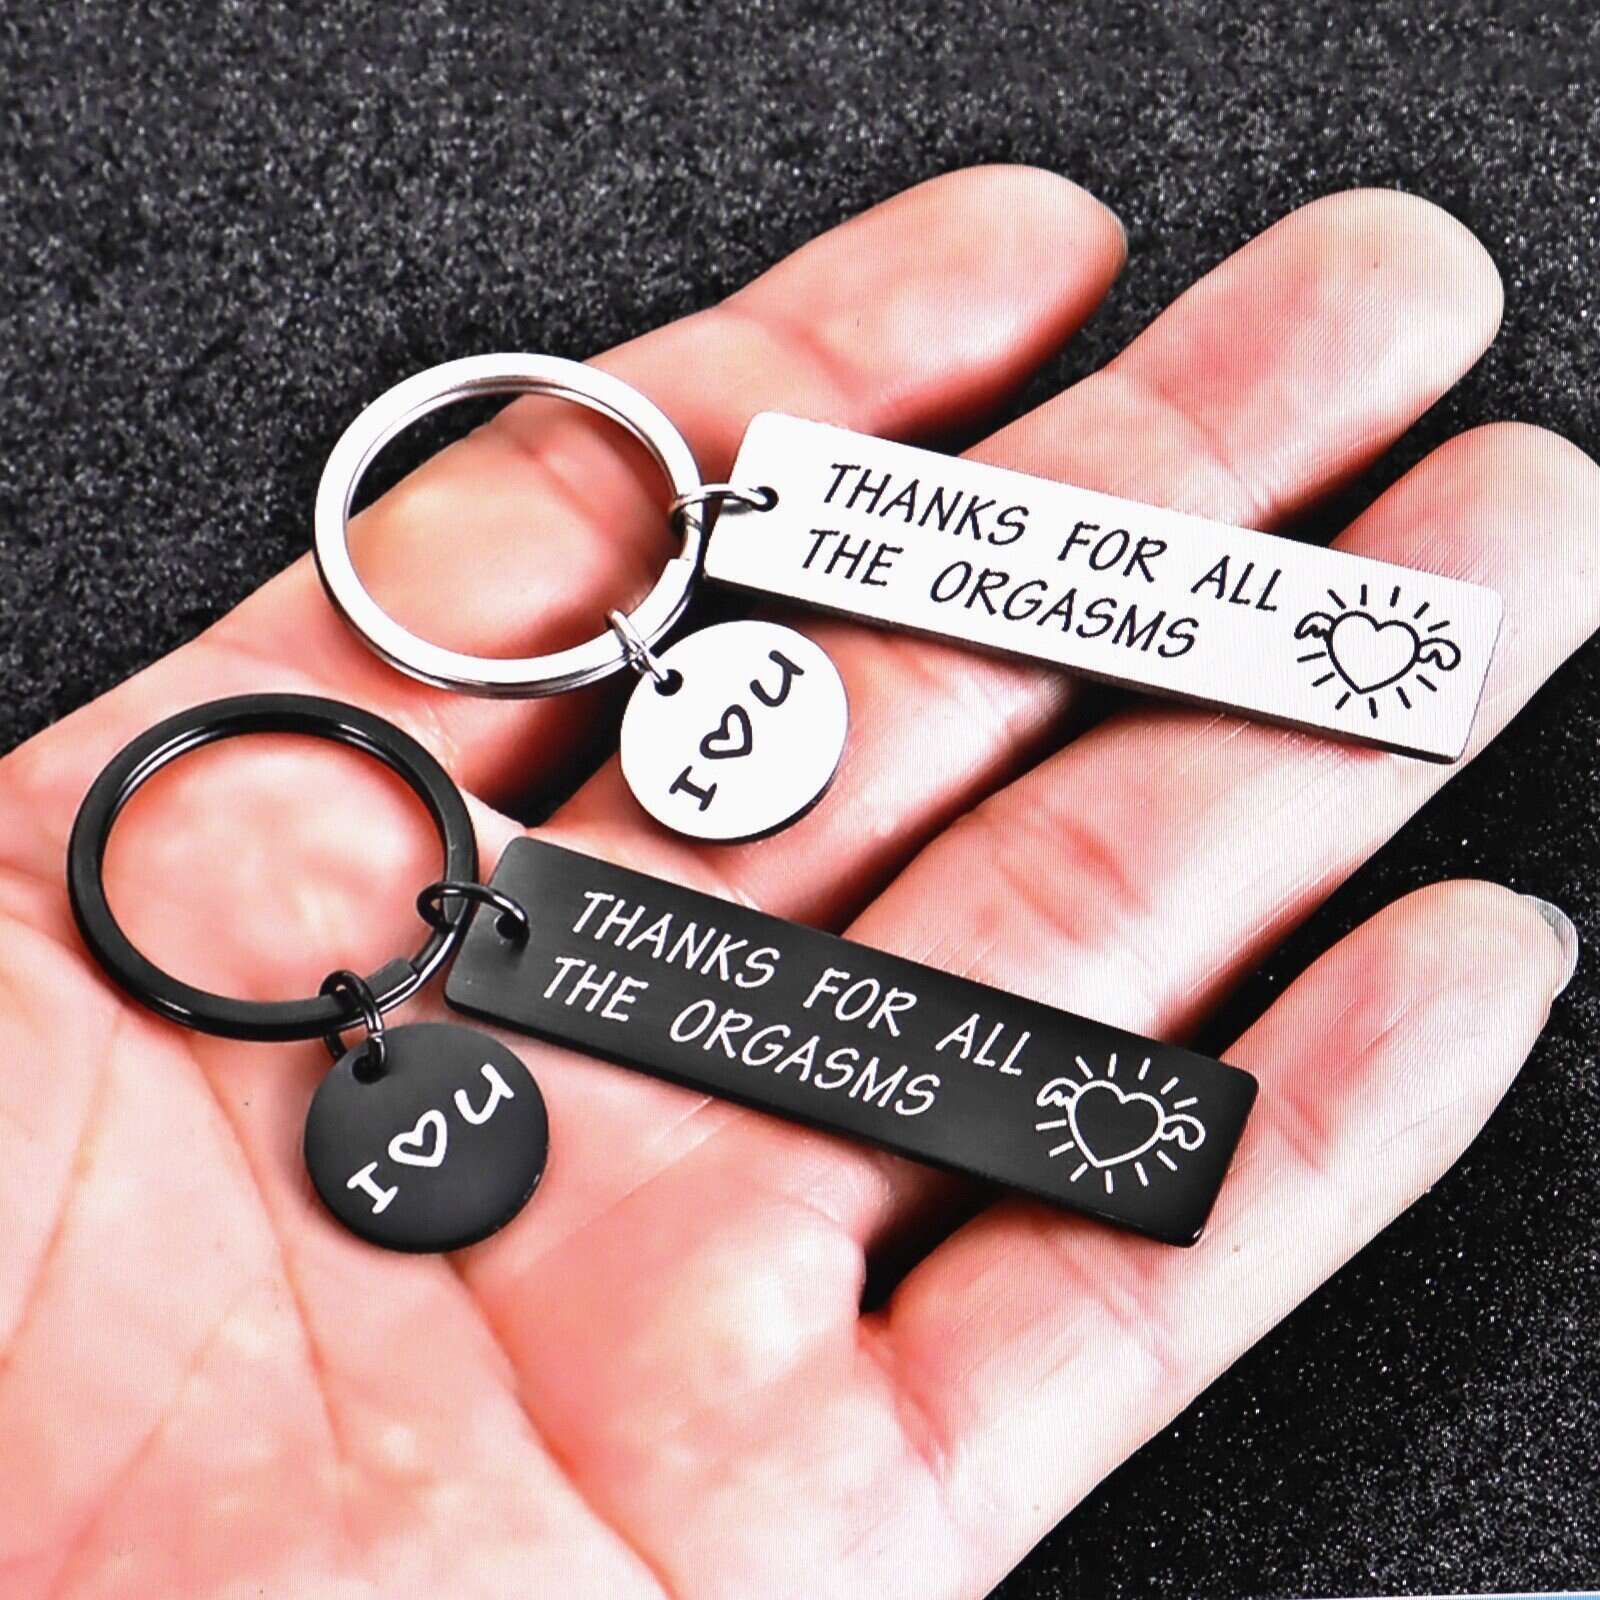 Valentine's Day - Thanks For All The Orgasms Keychain